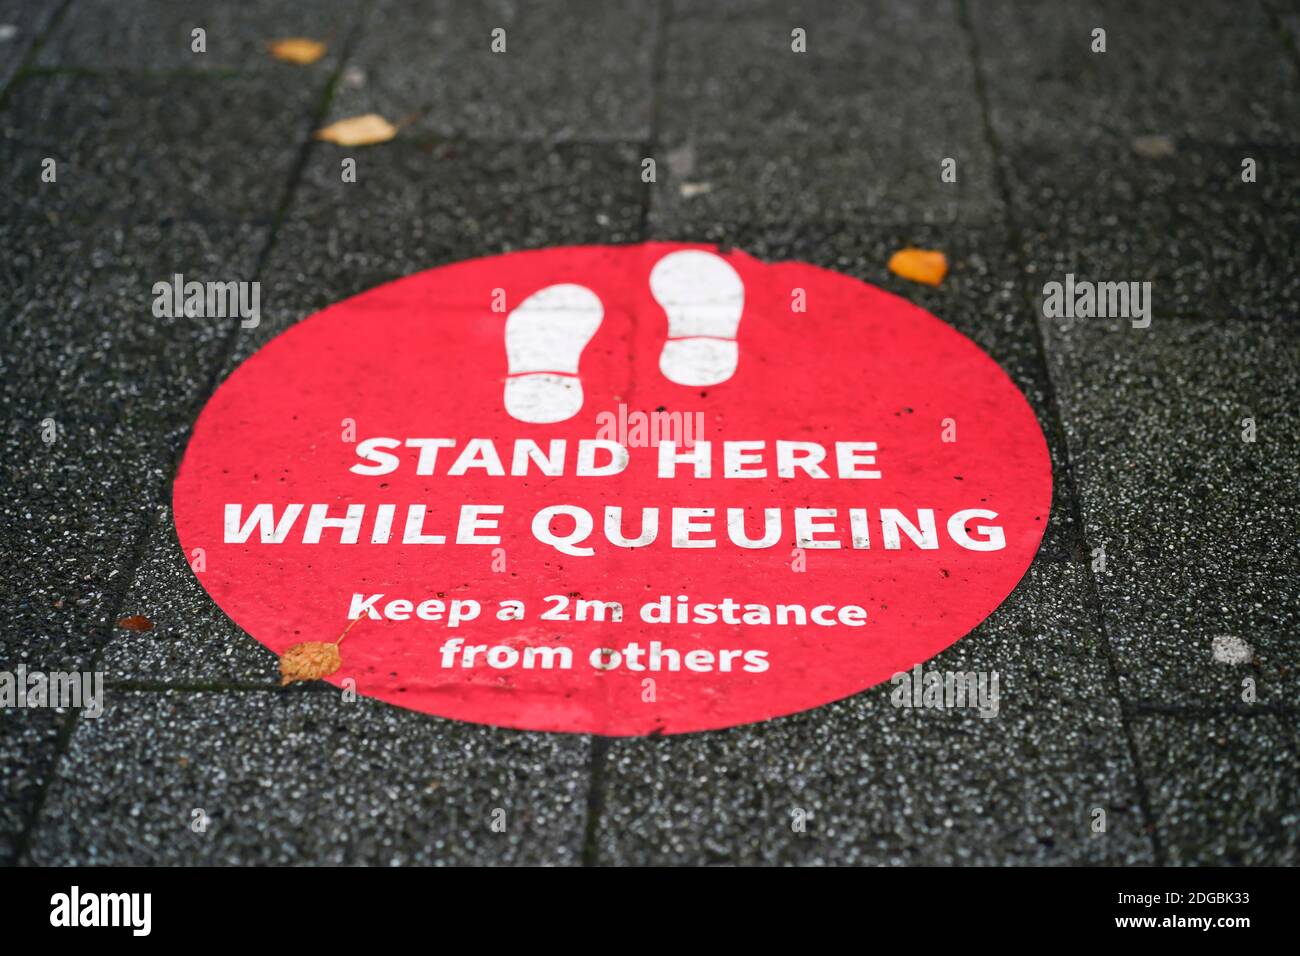 Social distance floor sign marker in UK town centre. Public advice to keep 2m distance from others when queueing during coronavirus pandemic. Stock Photo